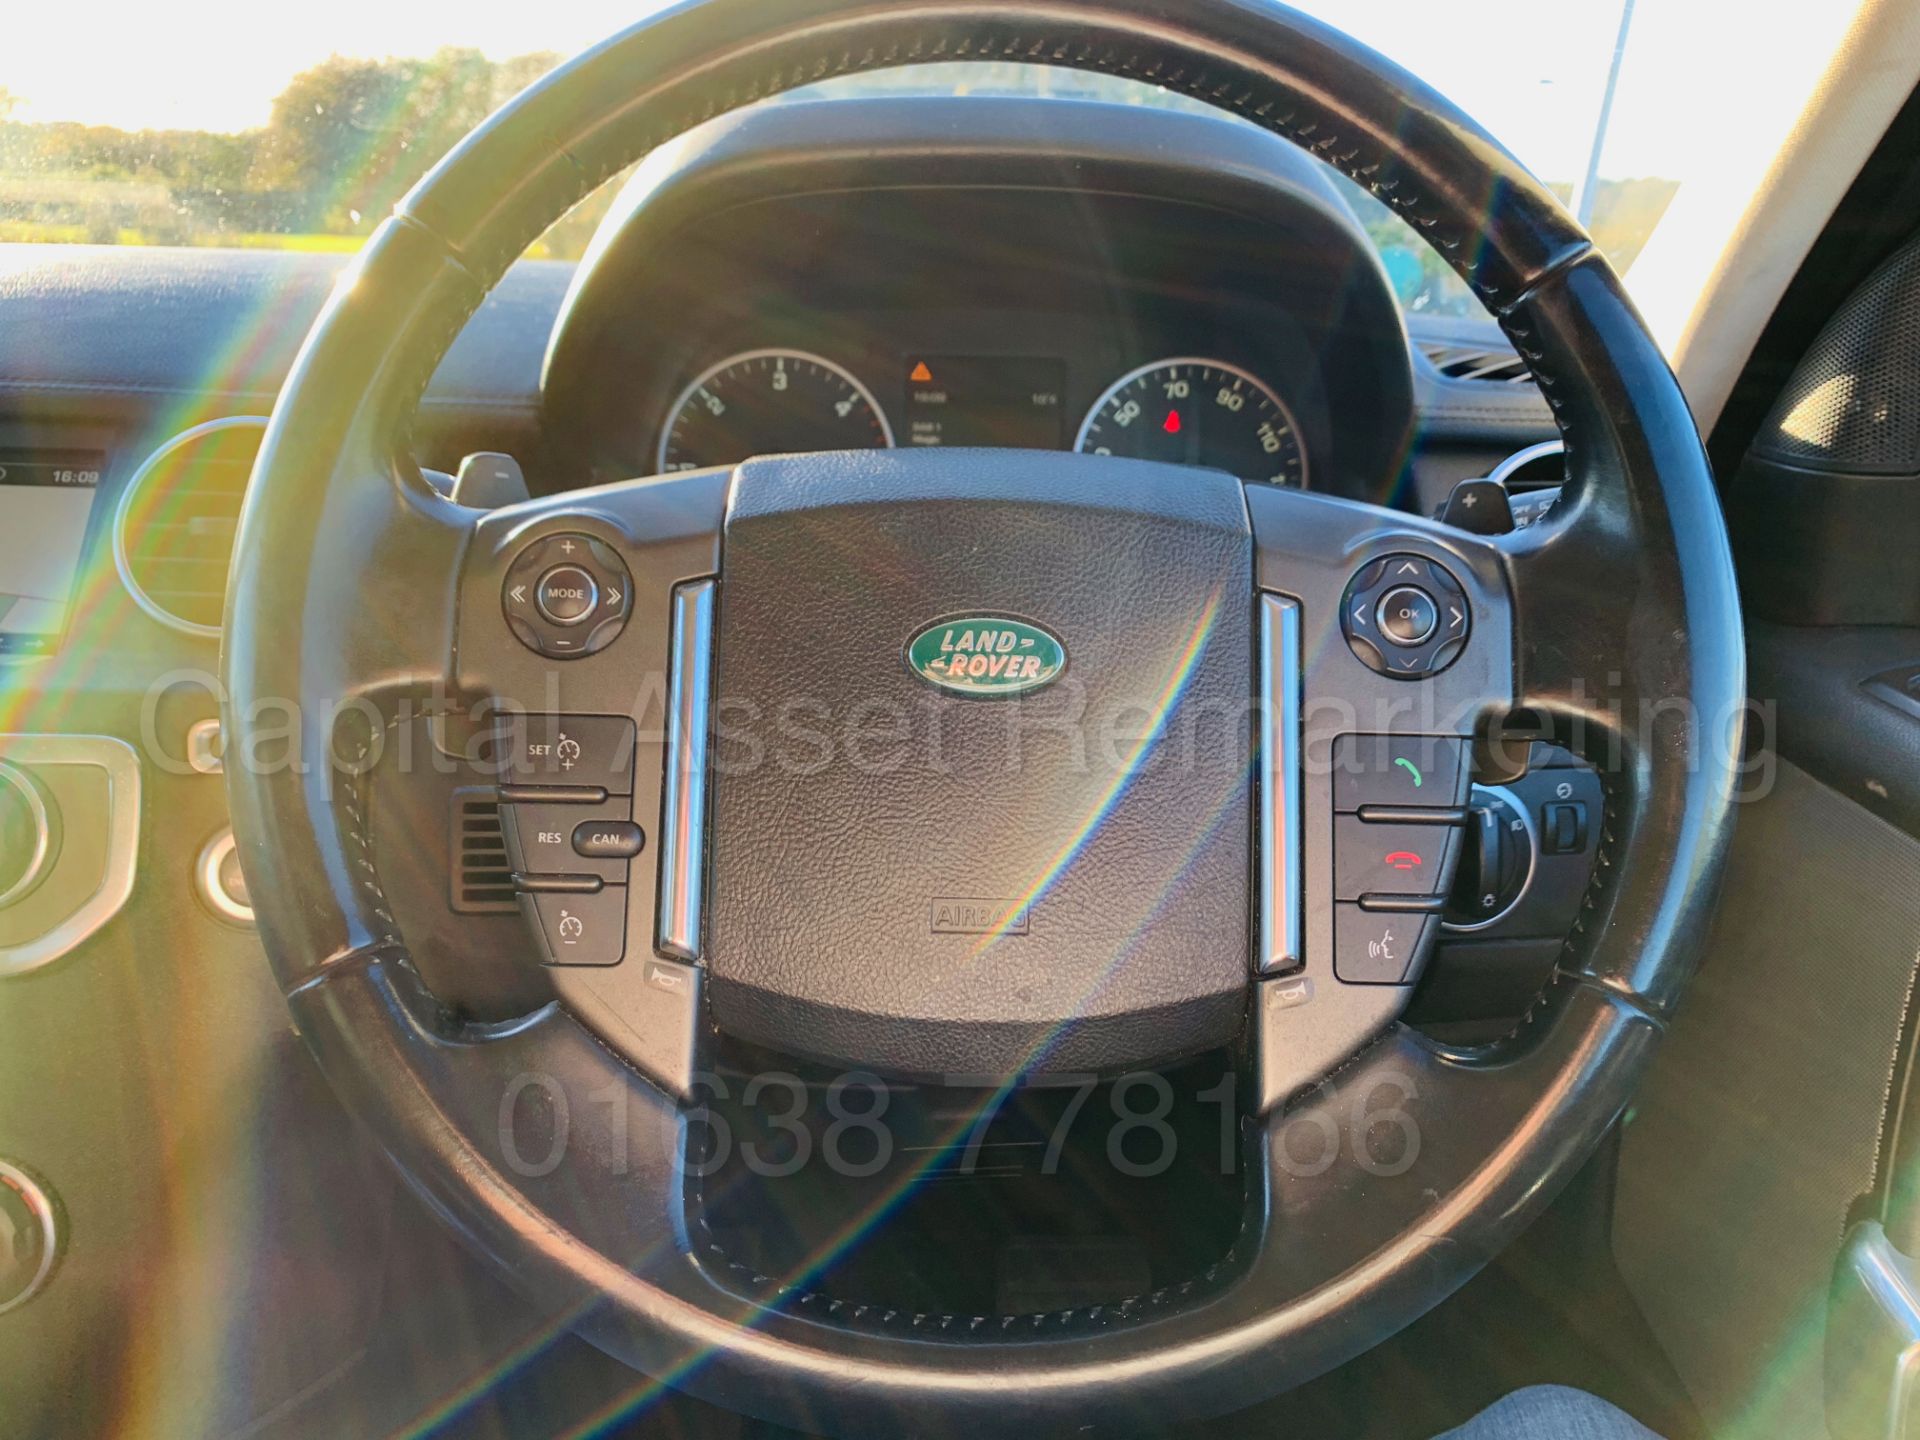 LAND ROVER DISCOVERY 4 **COMMERCIAL** (2014 MODEL) '3.0 SDV6 - 255 BHP - 8 SPEED AUTO' *HUGE SPEC* - Image 45 of 47